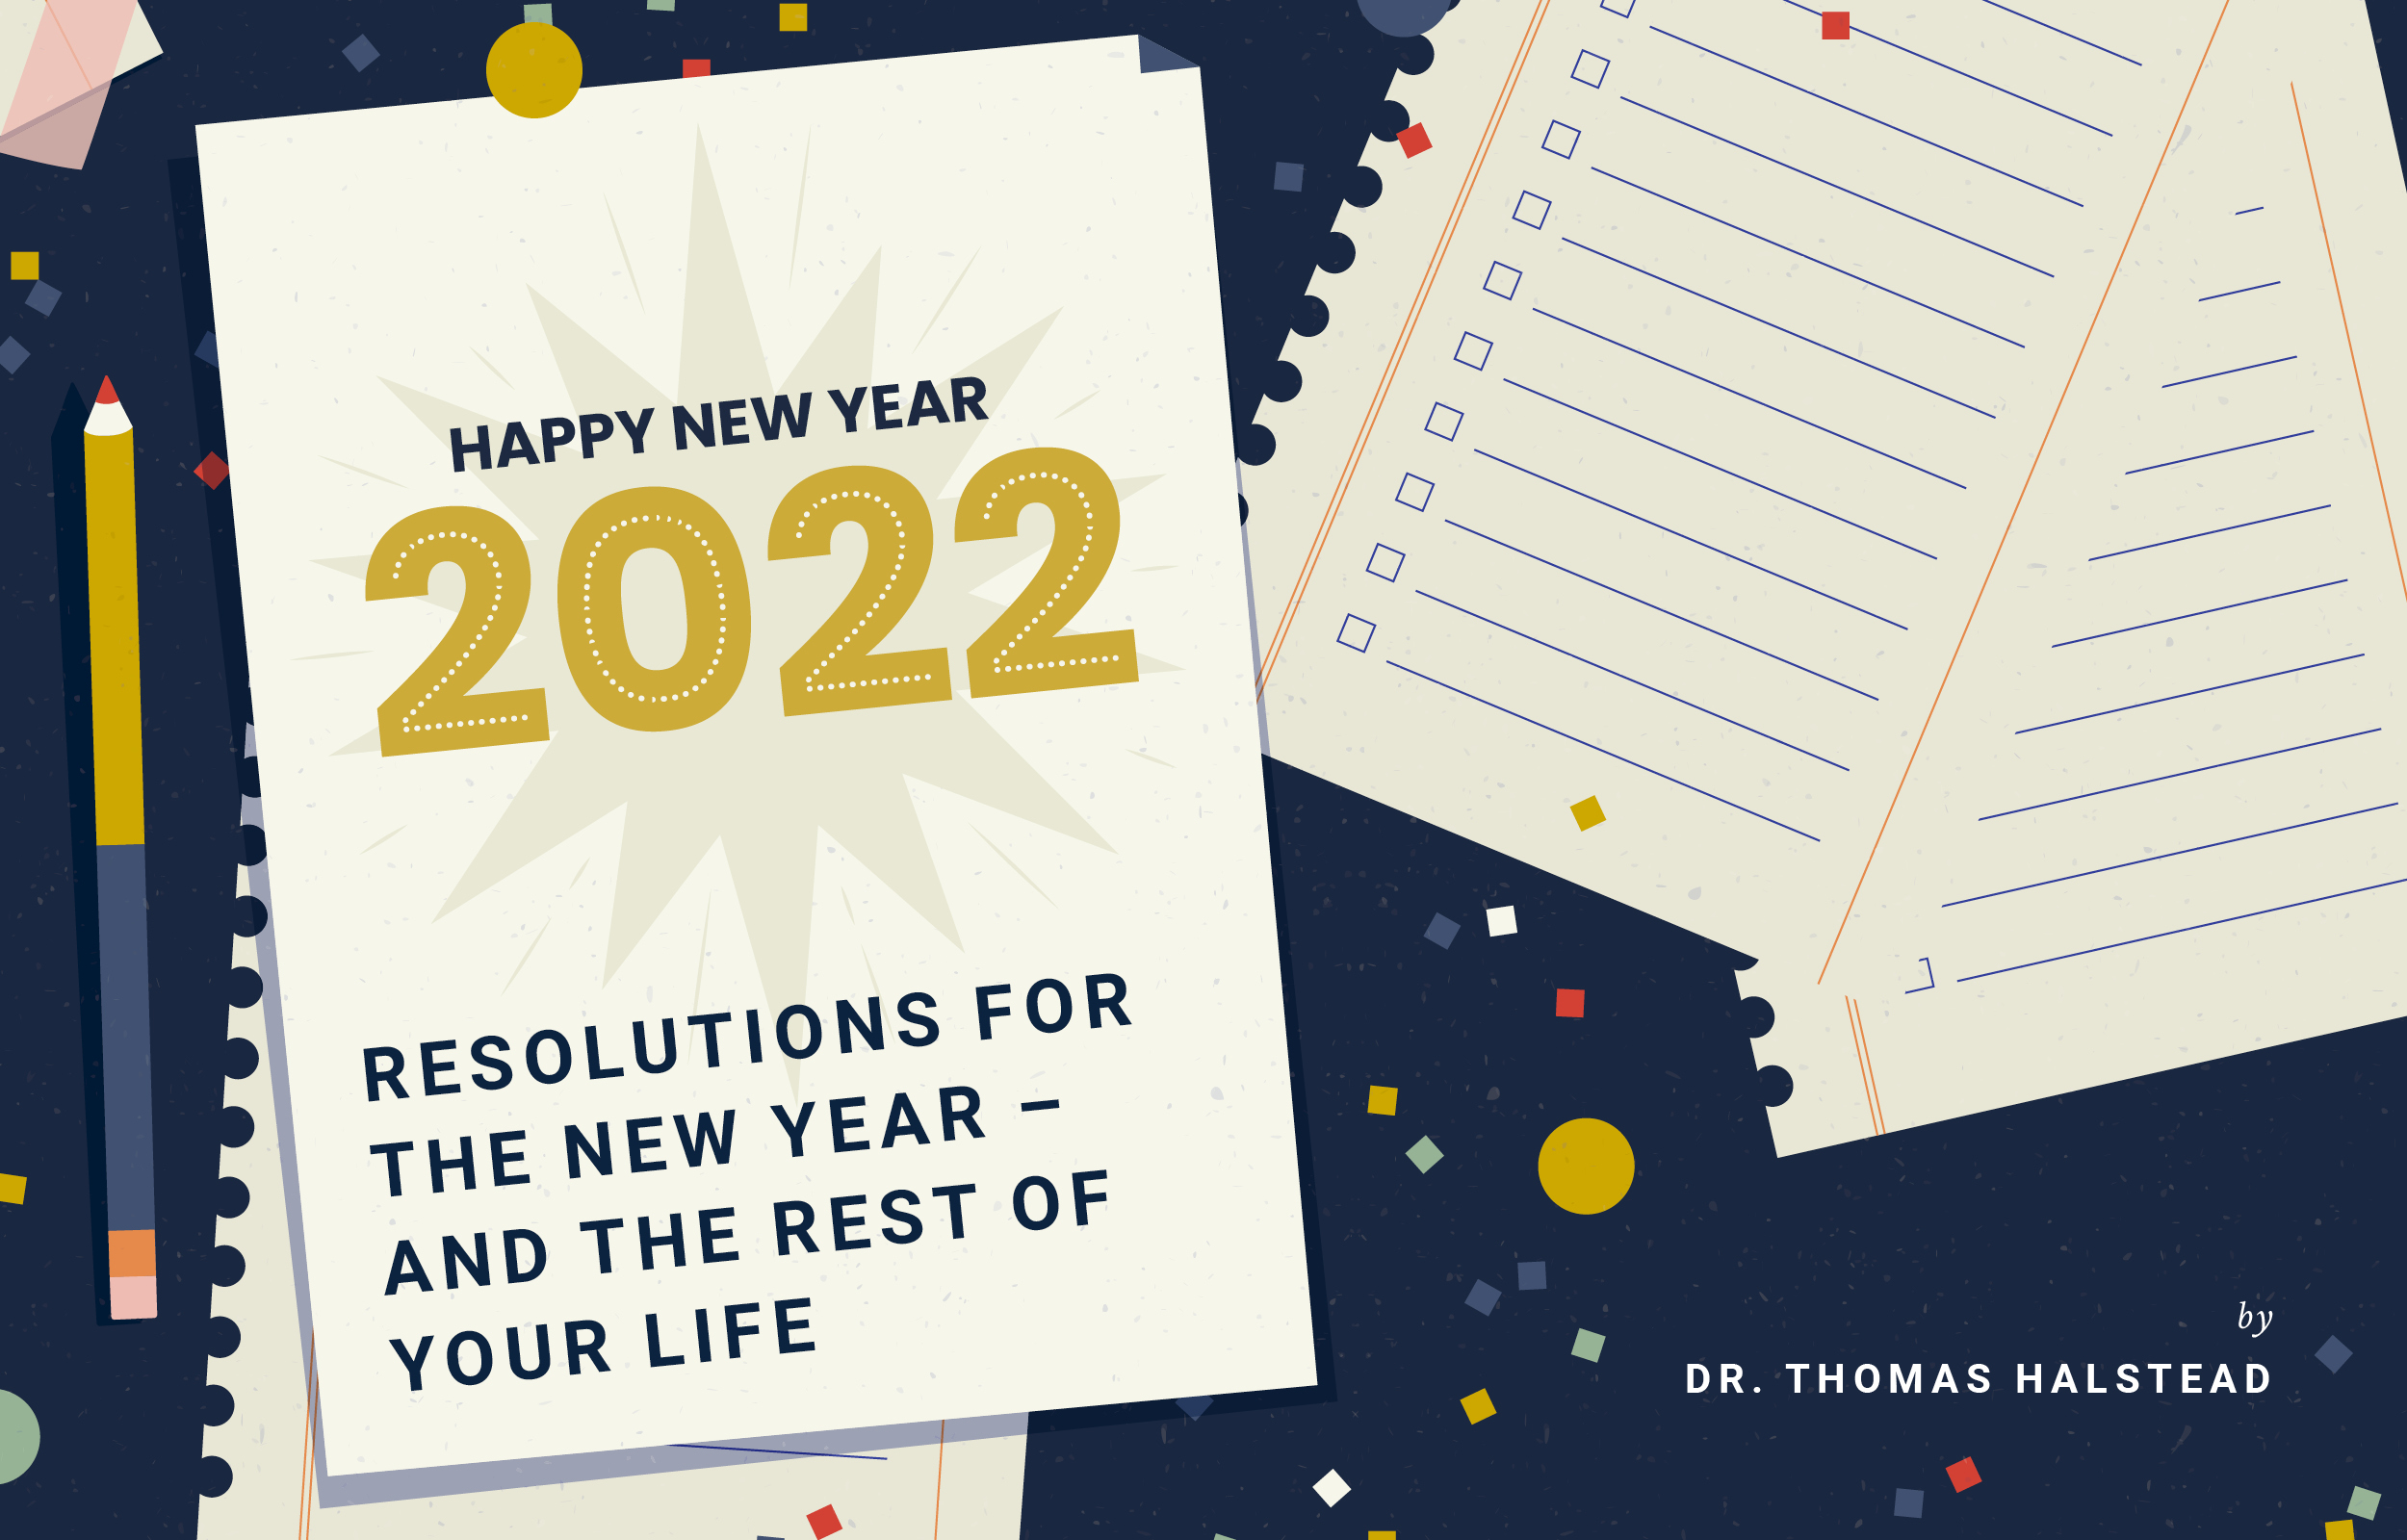 Resolutions for the New Year – and the Rest of Your Life image